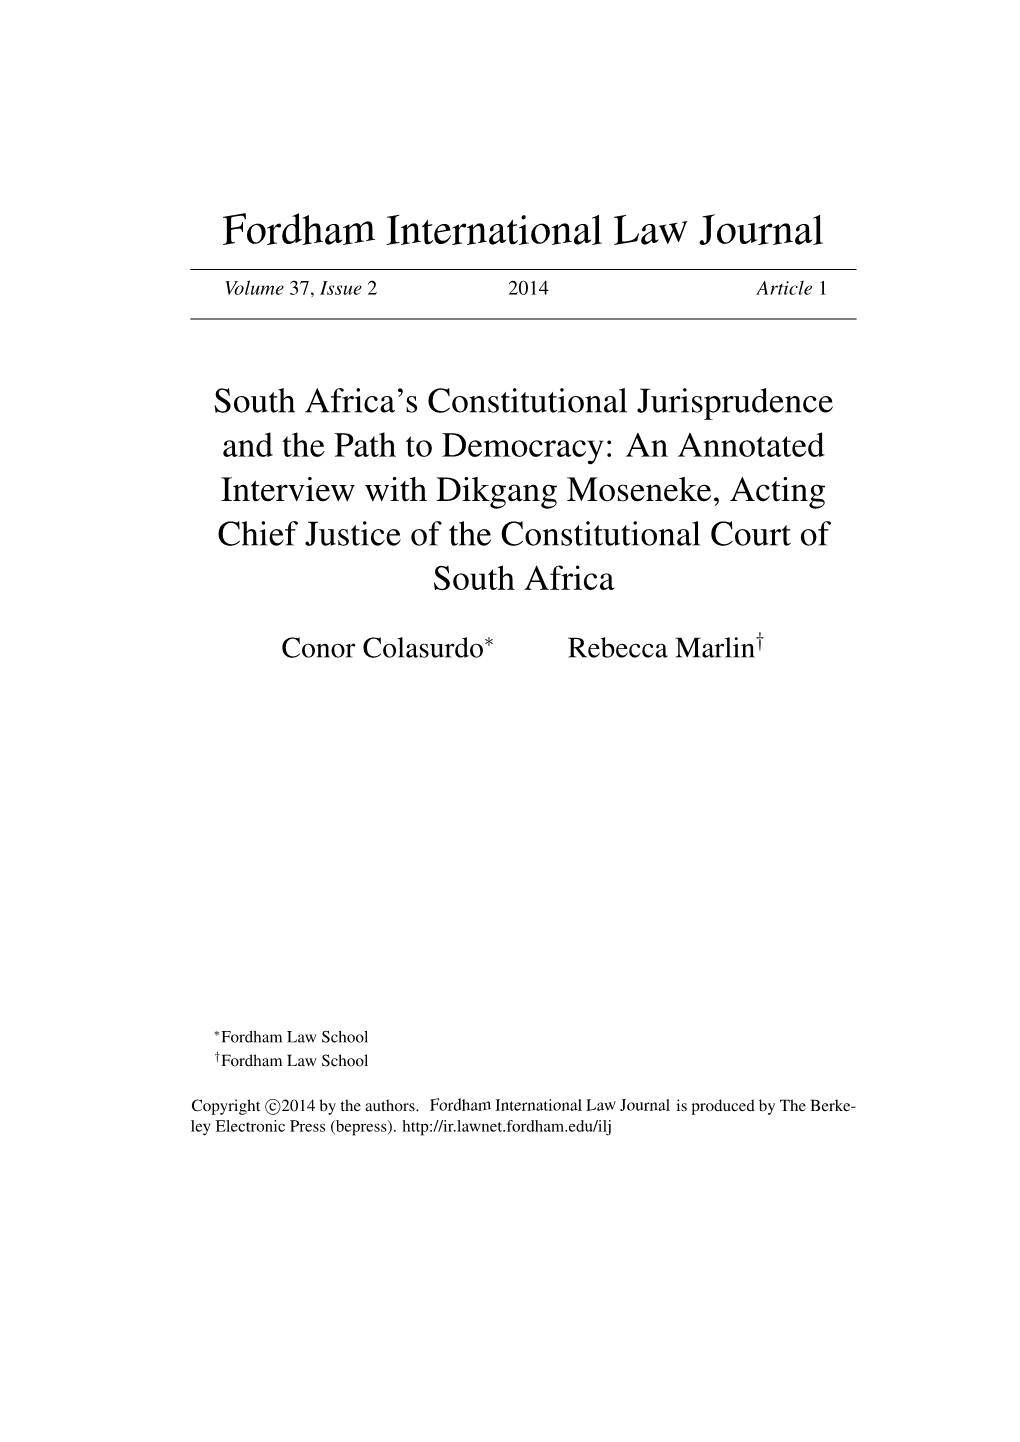 South Africa's Constitutional Jurisprudence and the Path To